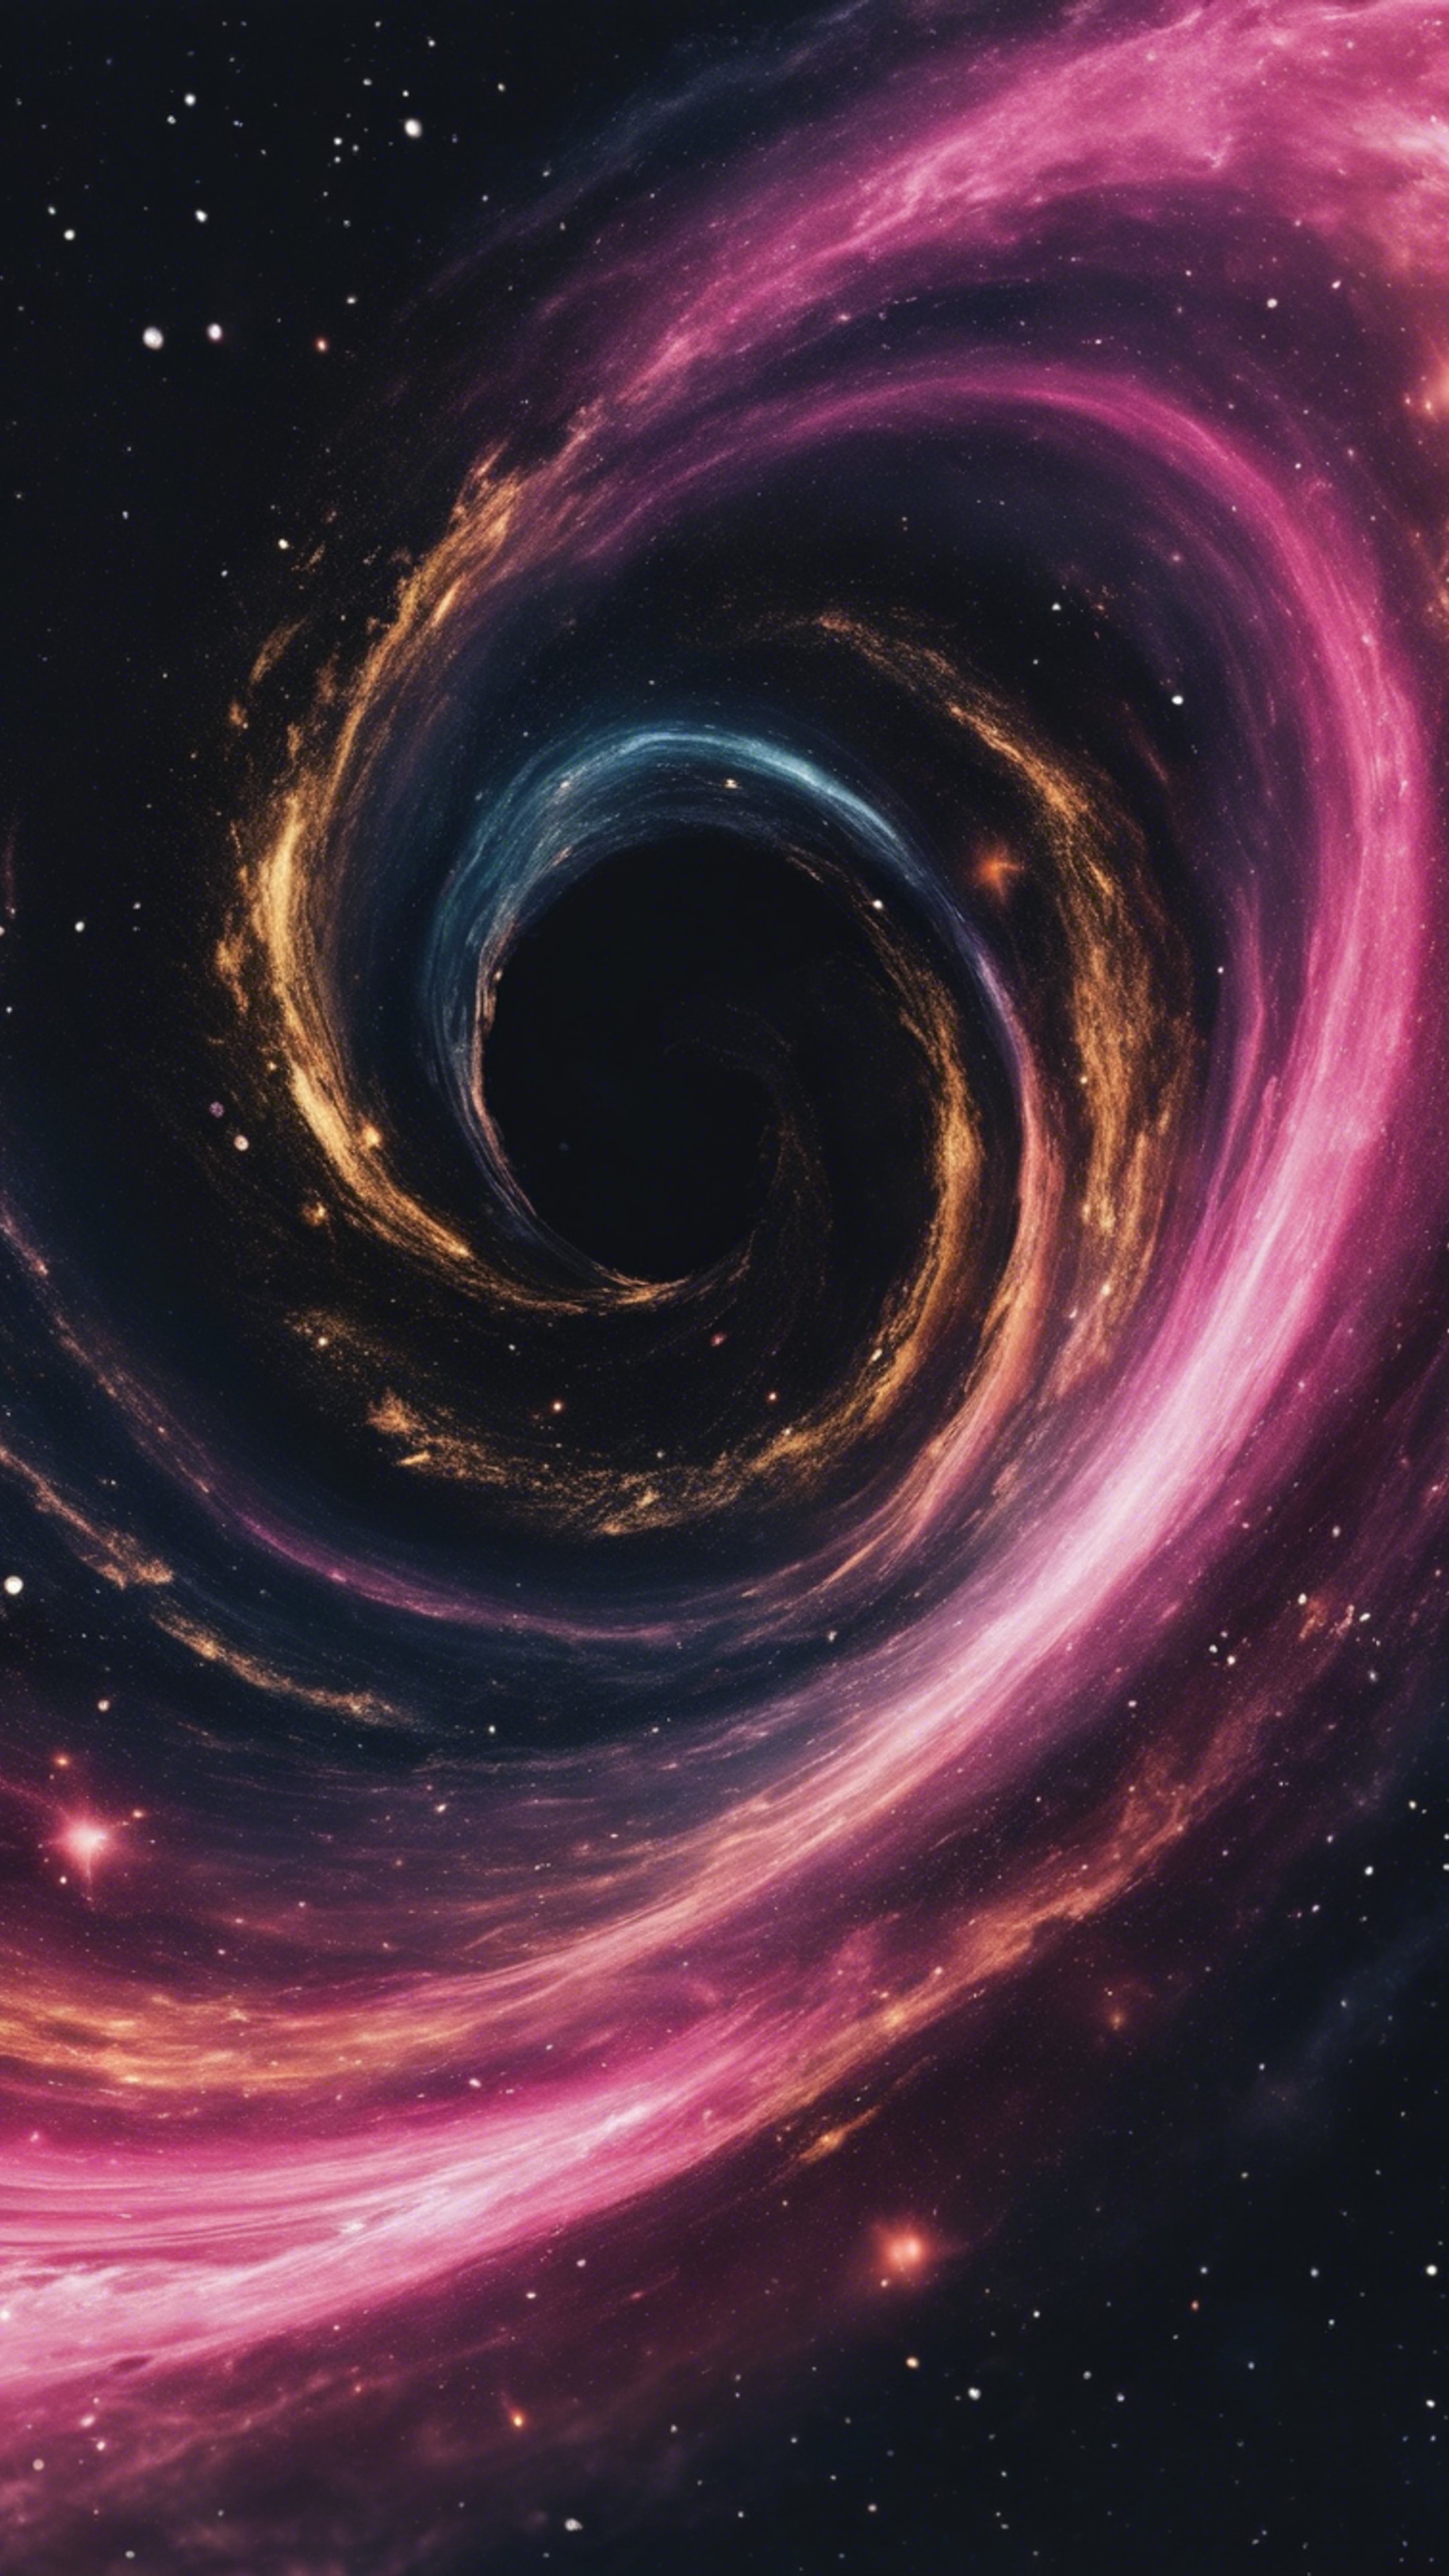 A swirling Galaxy with hues of pink and gold amongst the dark void of space. Wallpaper[38386911806f452c9333]